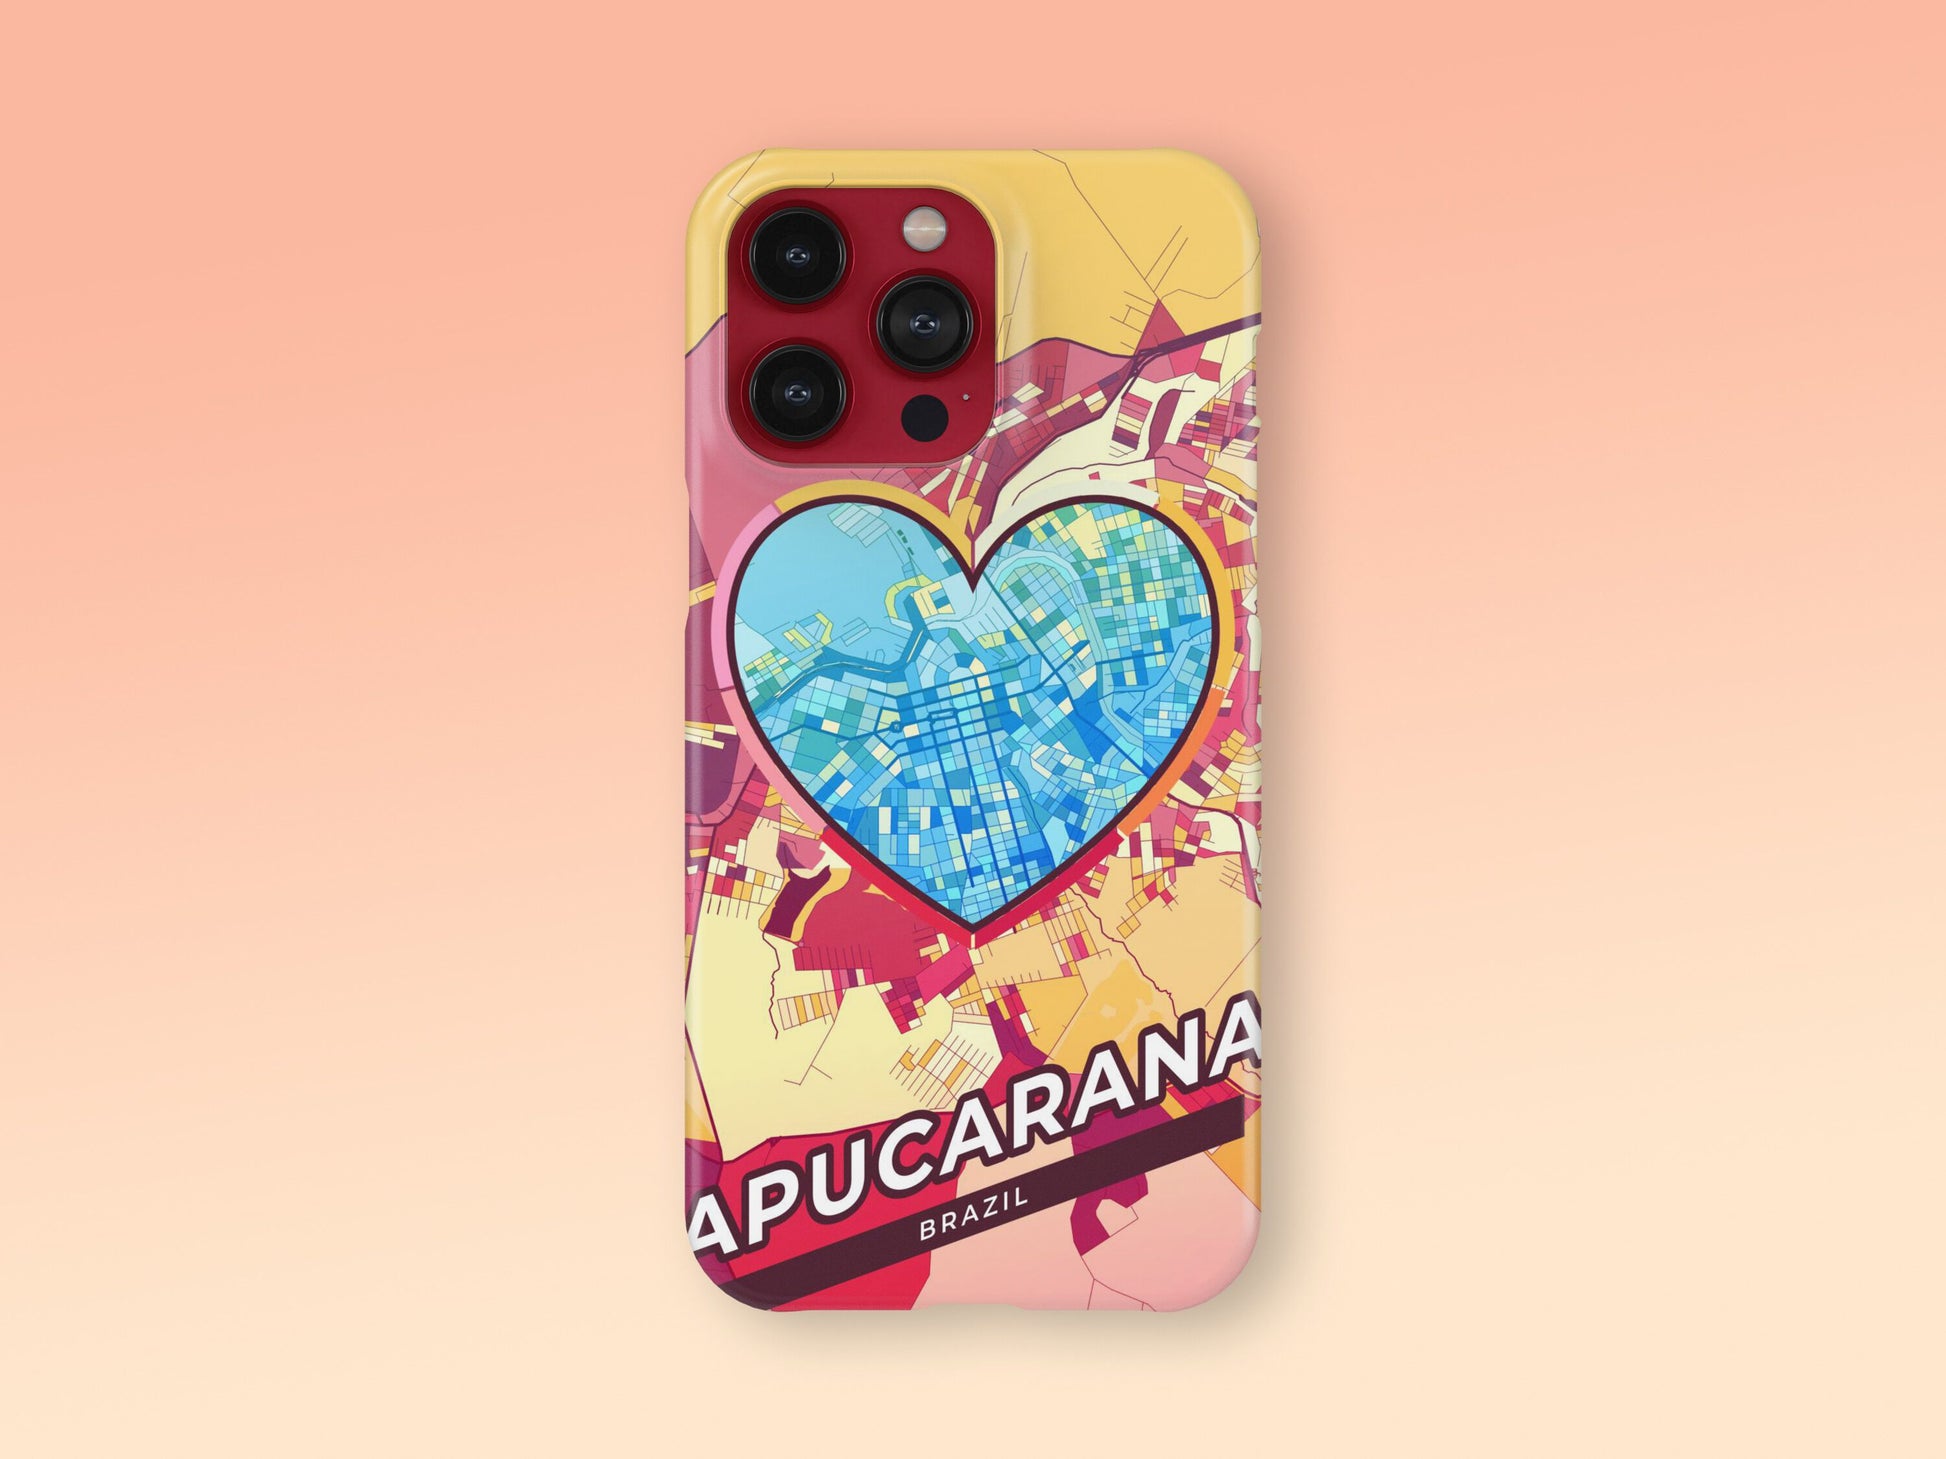 Apucarana Brazil slim phone case with colorful icon. Birthday, wedding or housewarming gift. Couple match cases. 2